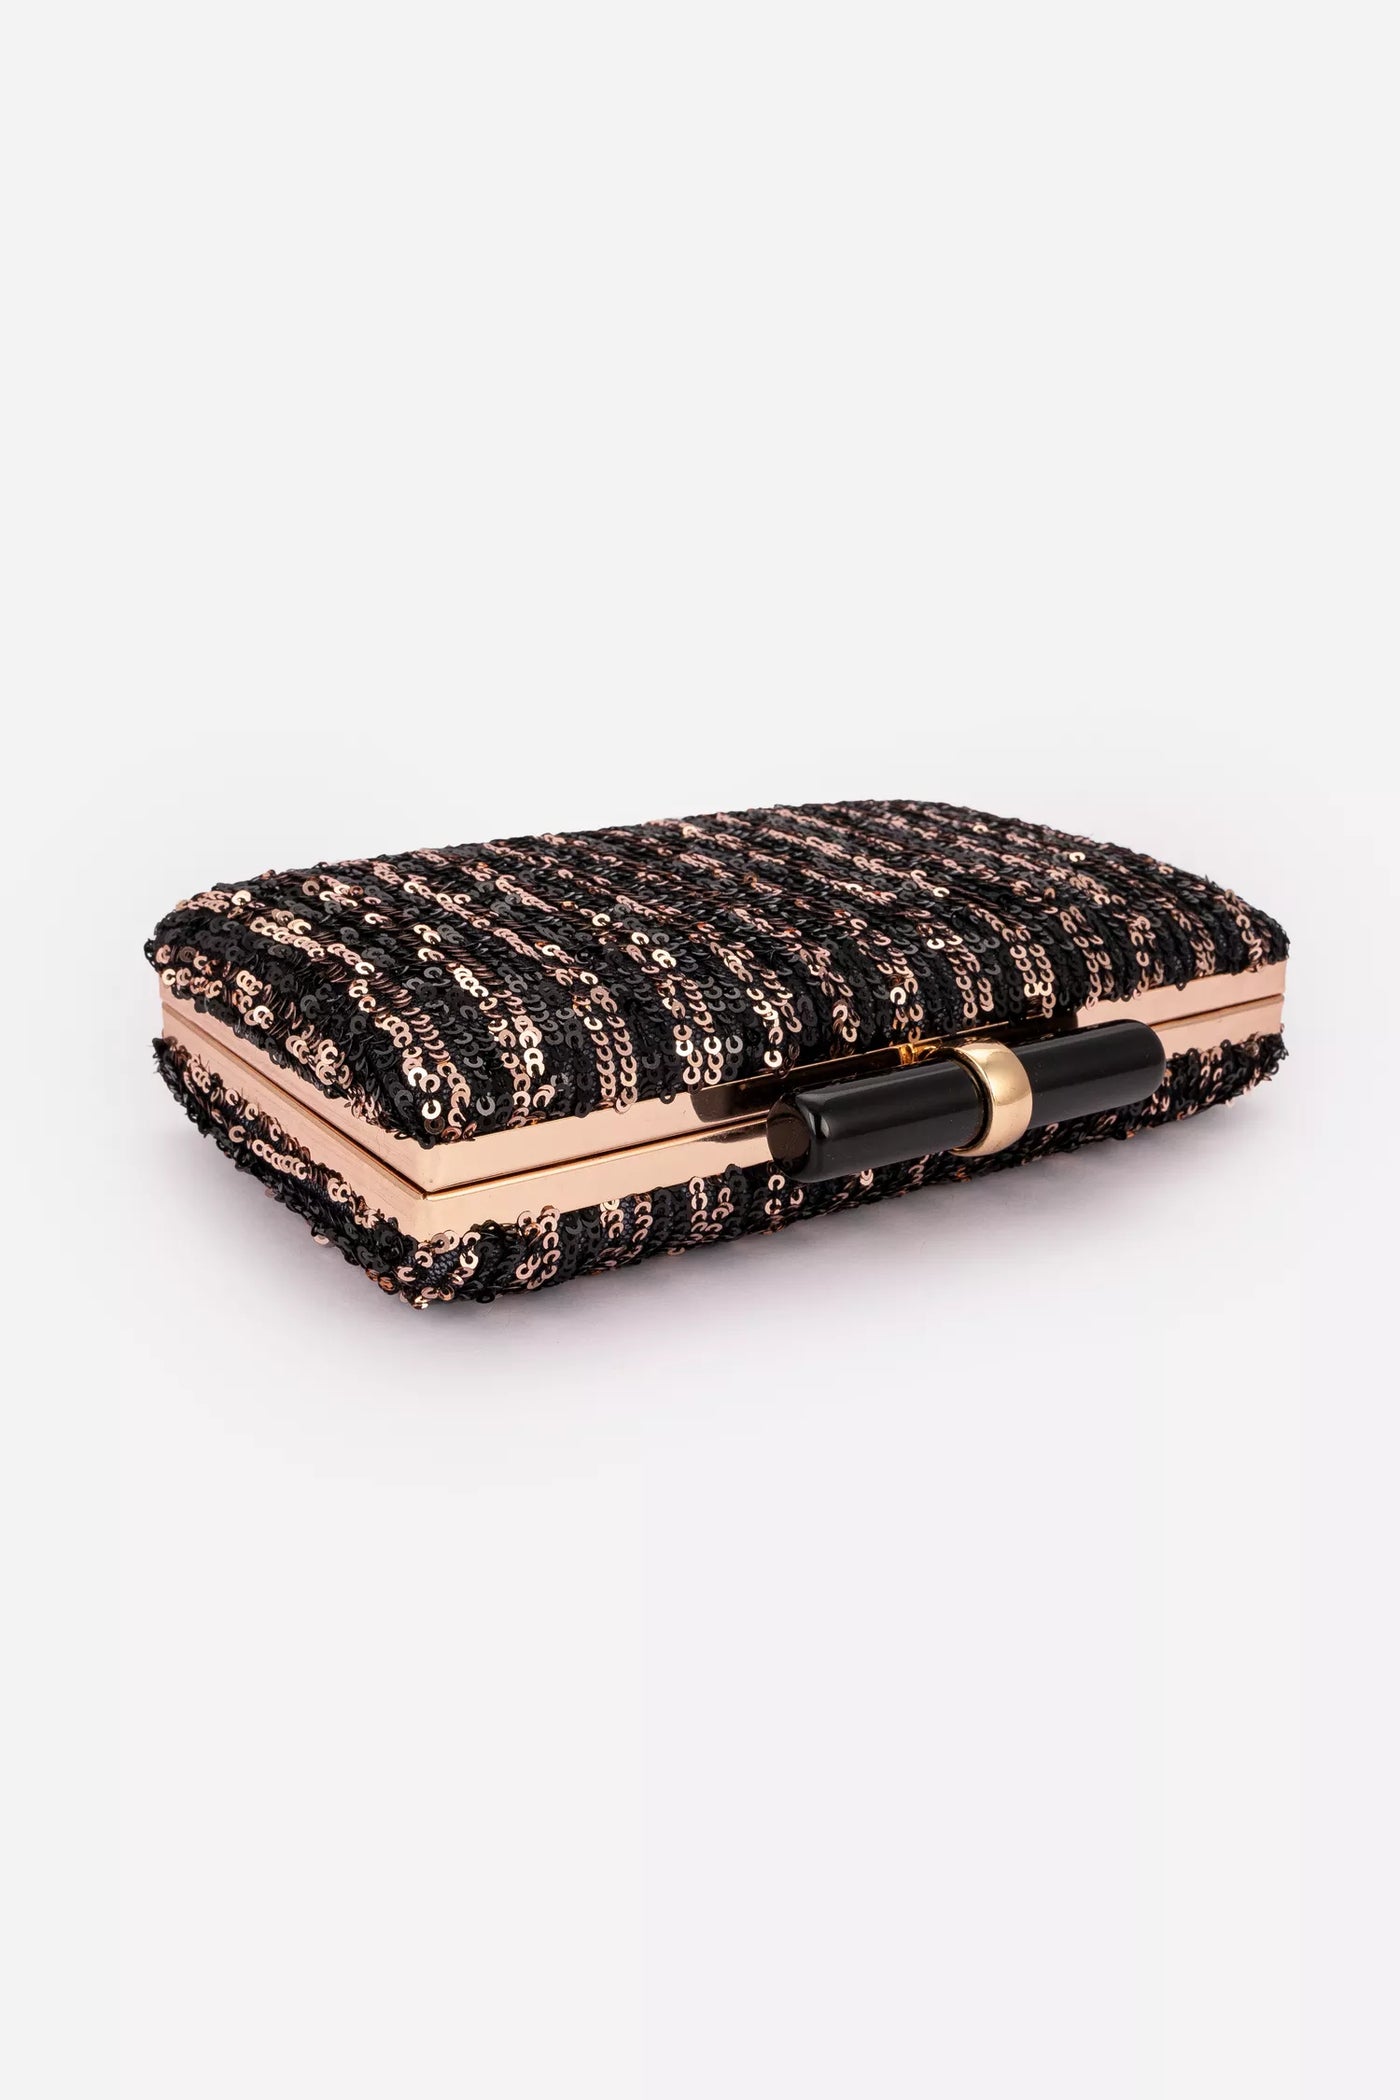 Light Gold And Black Clutch